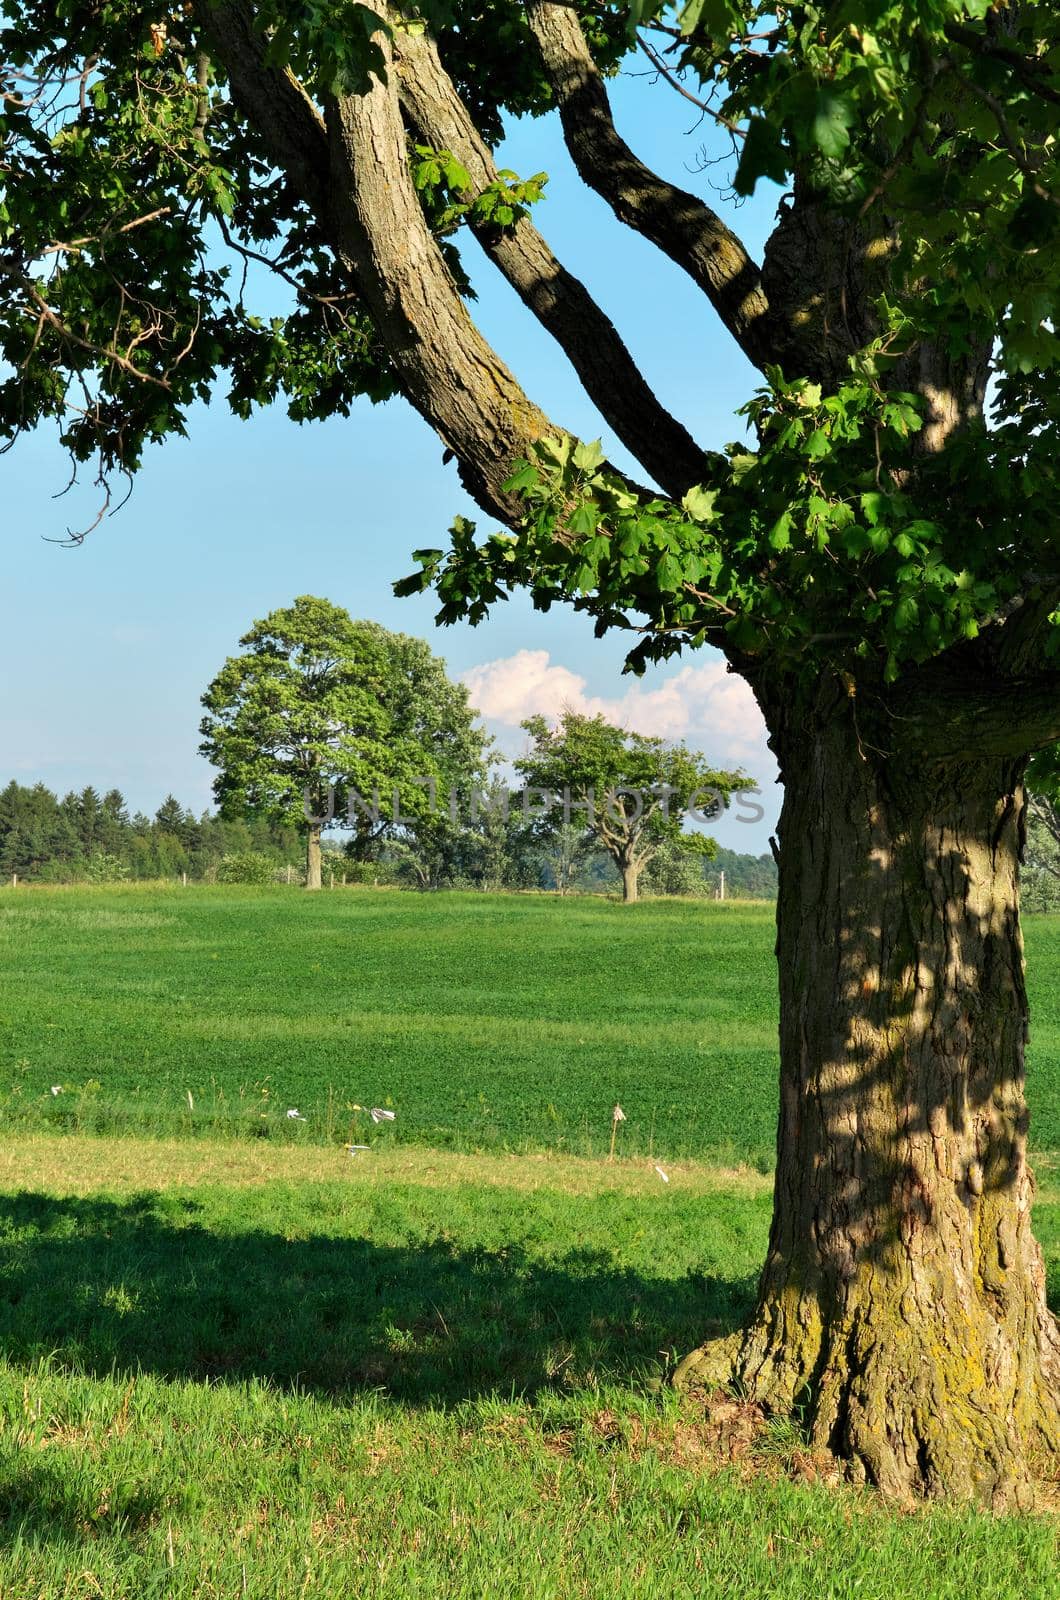 Idyllic Summer Scene at a Farm with Giant Maple Tree and Green Pastures on a Sunny Day by markvandam